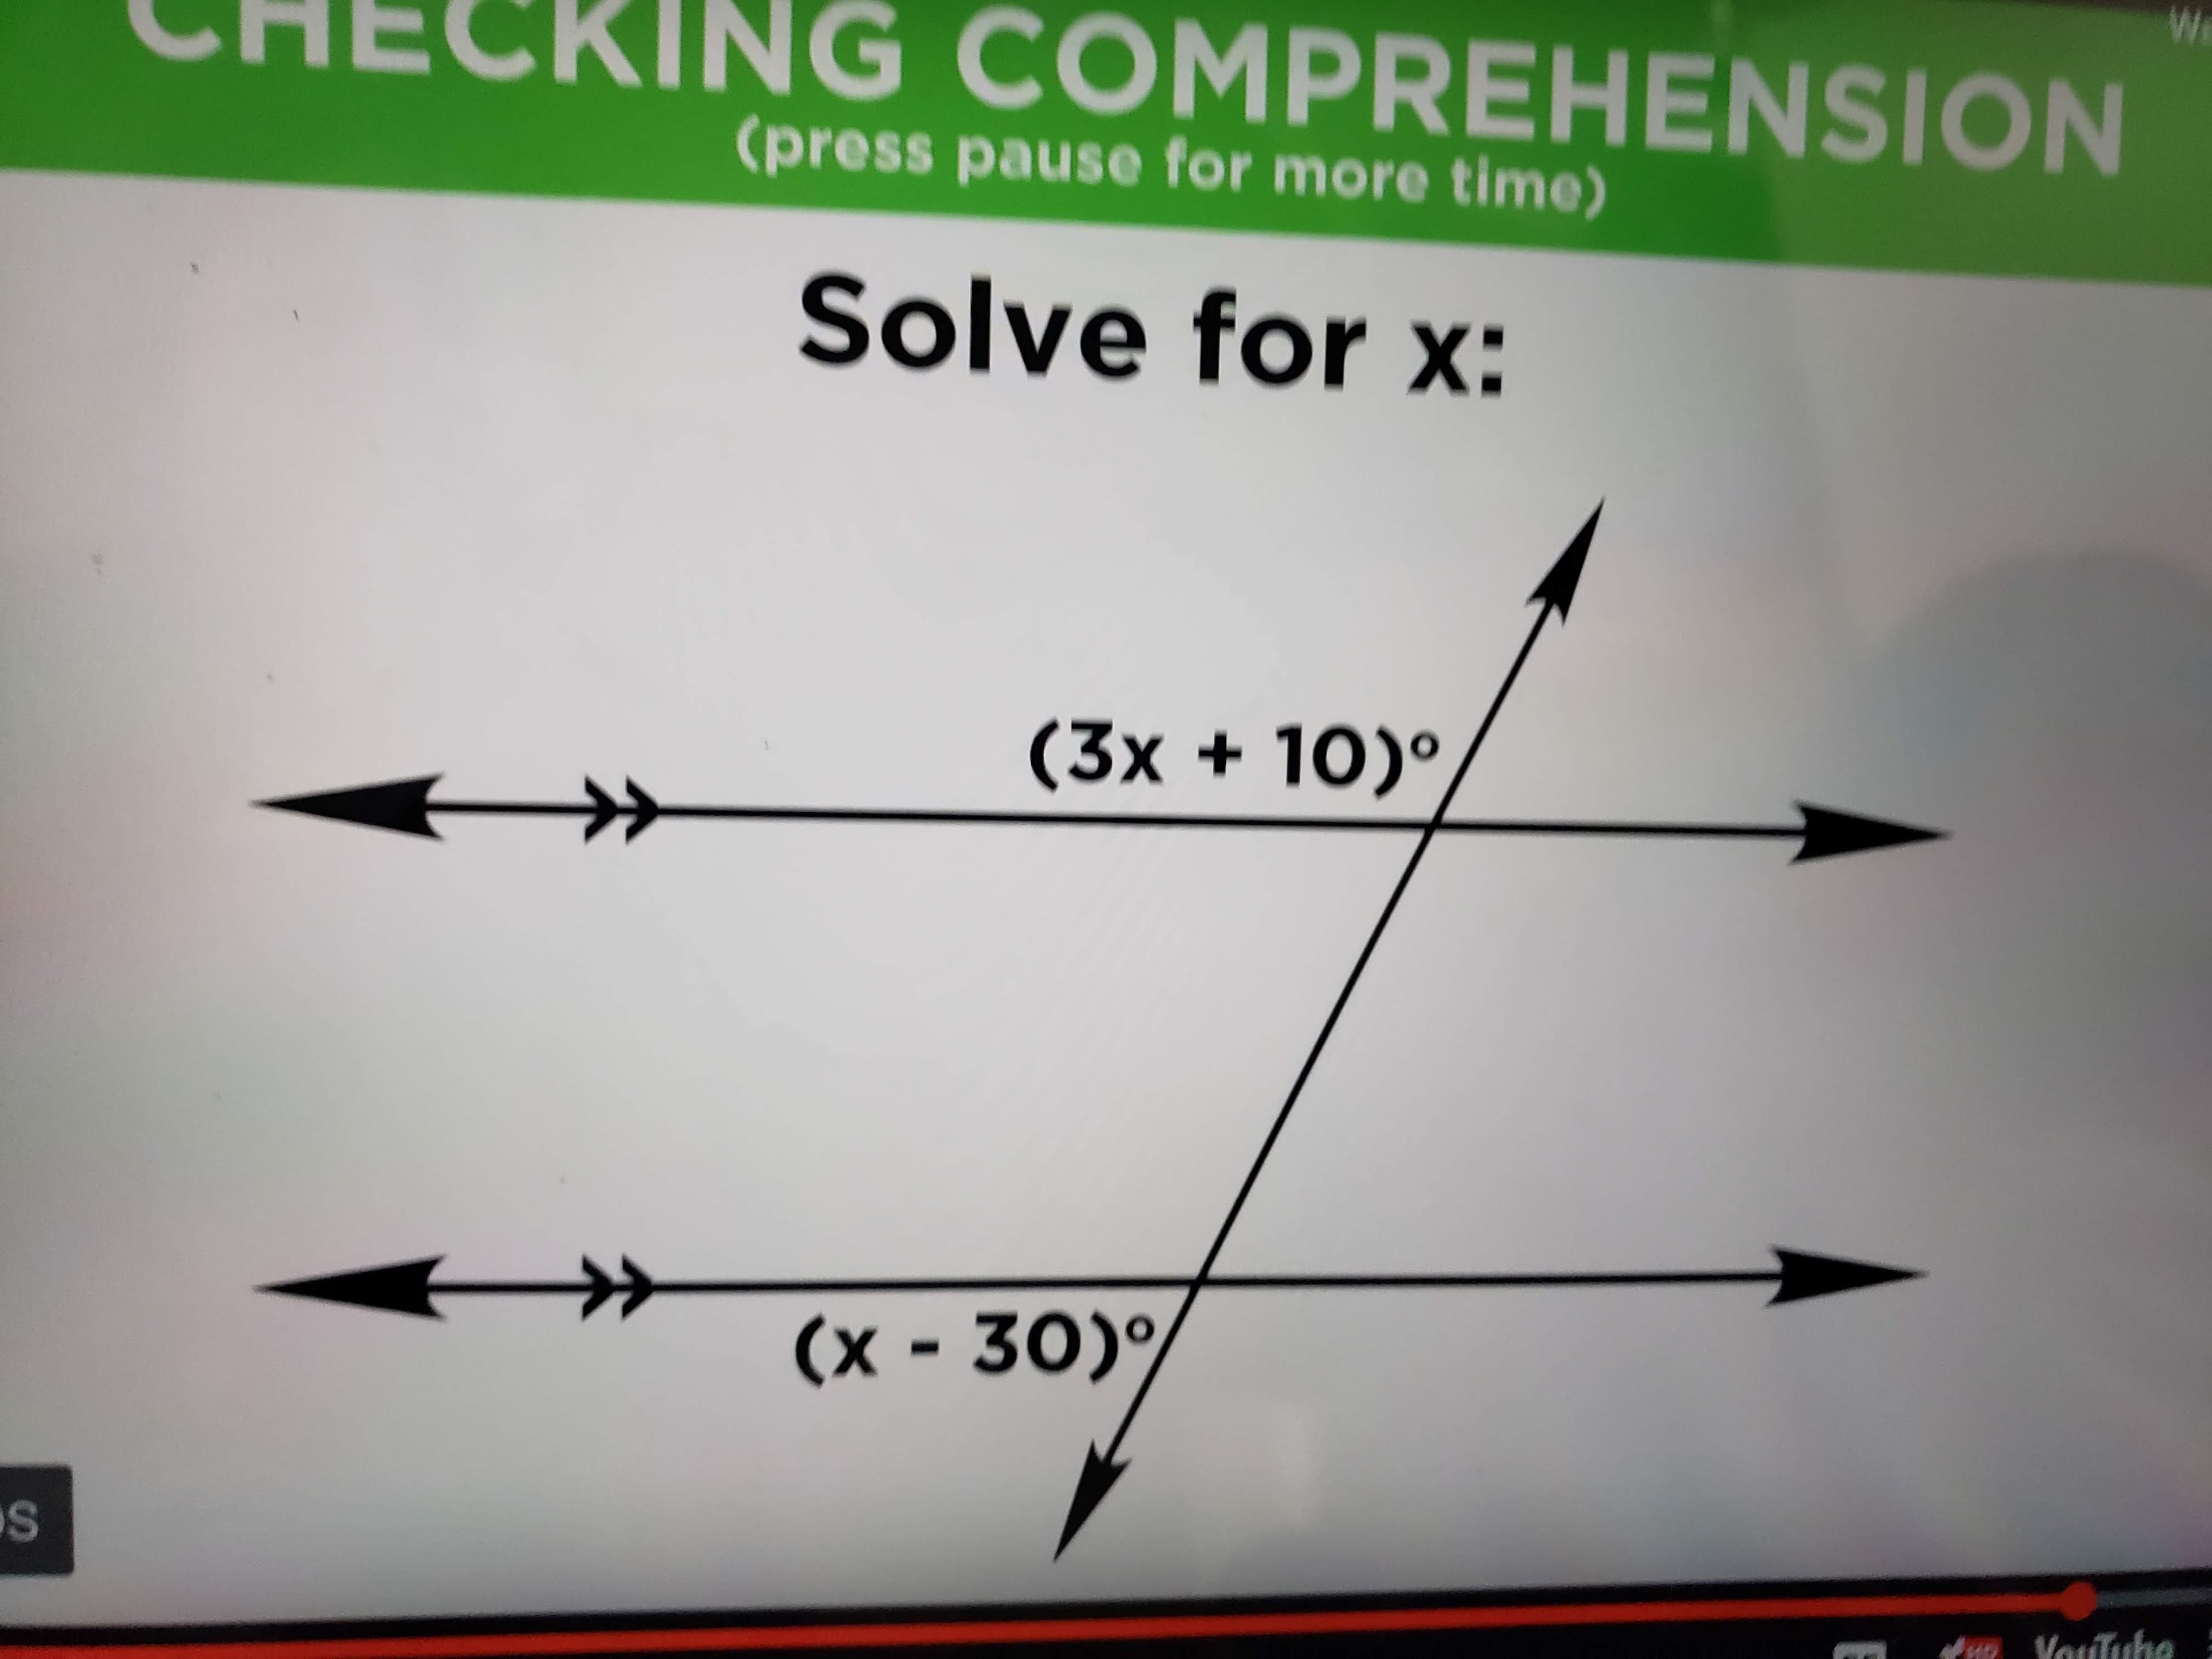 We
ING COMPREHENSION
(press pause for more time)
Solve for x:
(3x + 10)°
(x-30)°
%3D
Vouluhe
